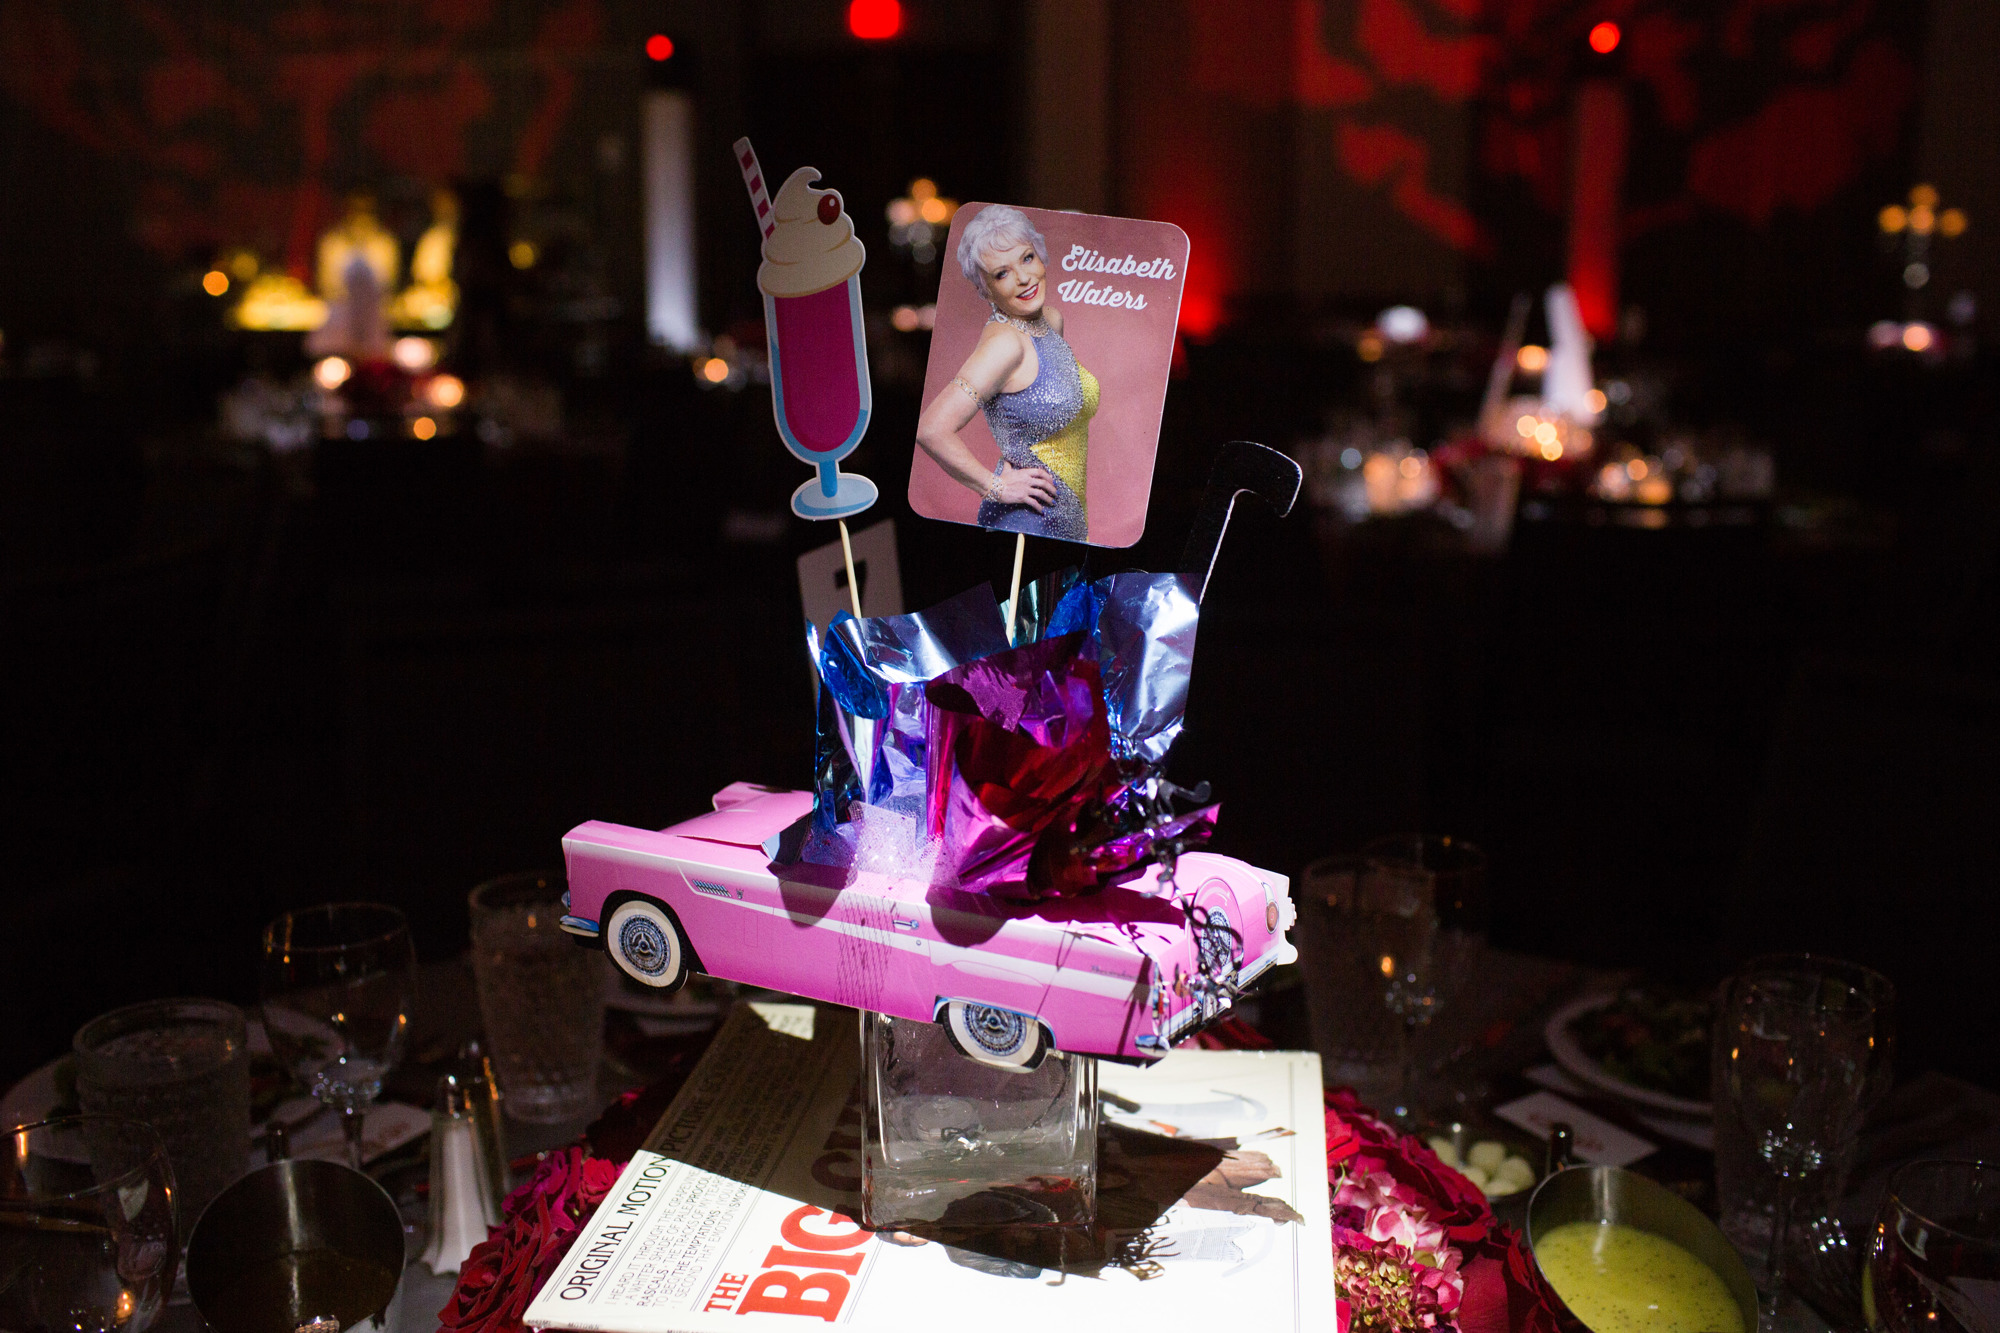 The centerpieces on Elisabeth Water's support tables.